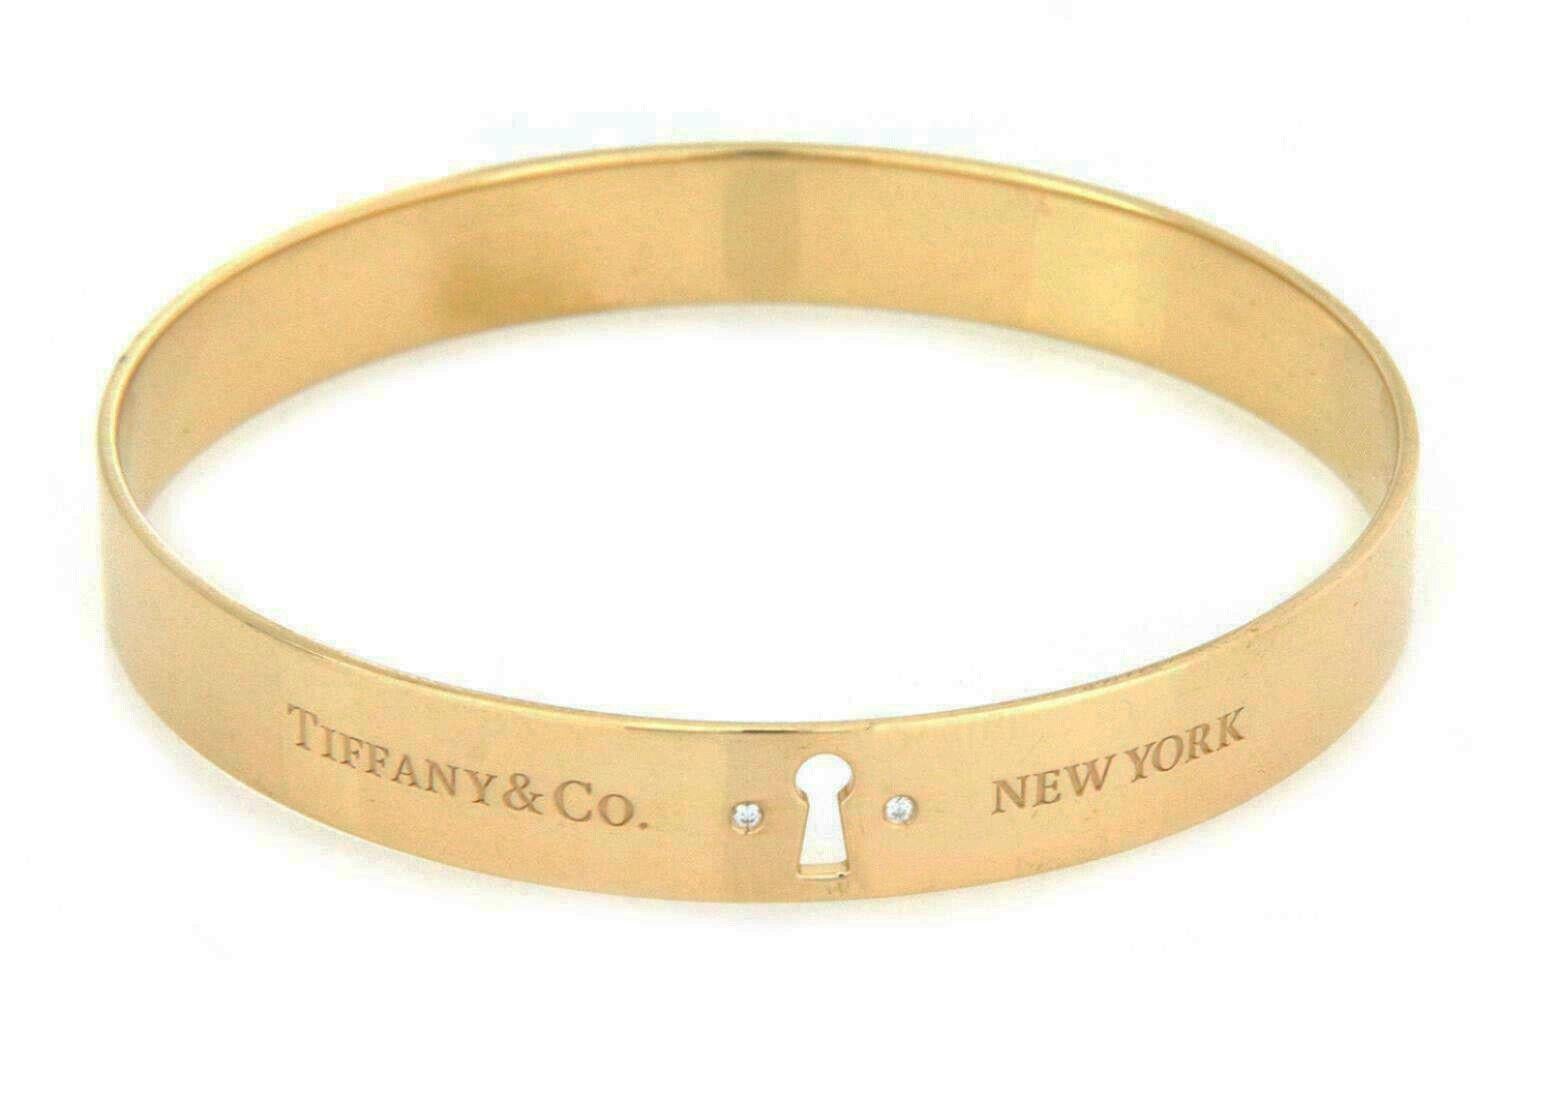 This elegant large size authentic bangle is by Tiffany & Co. from the Keyhole Lock Collection. It is crafted from 18k yellow gold with a polished finish featuring a 9mm wide band bracelet.  The front center of the bangle has a keyhole with a flush